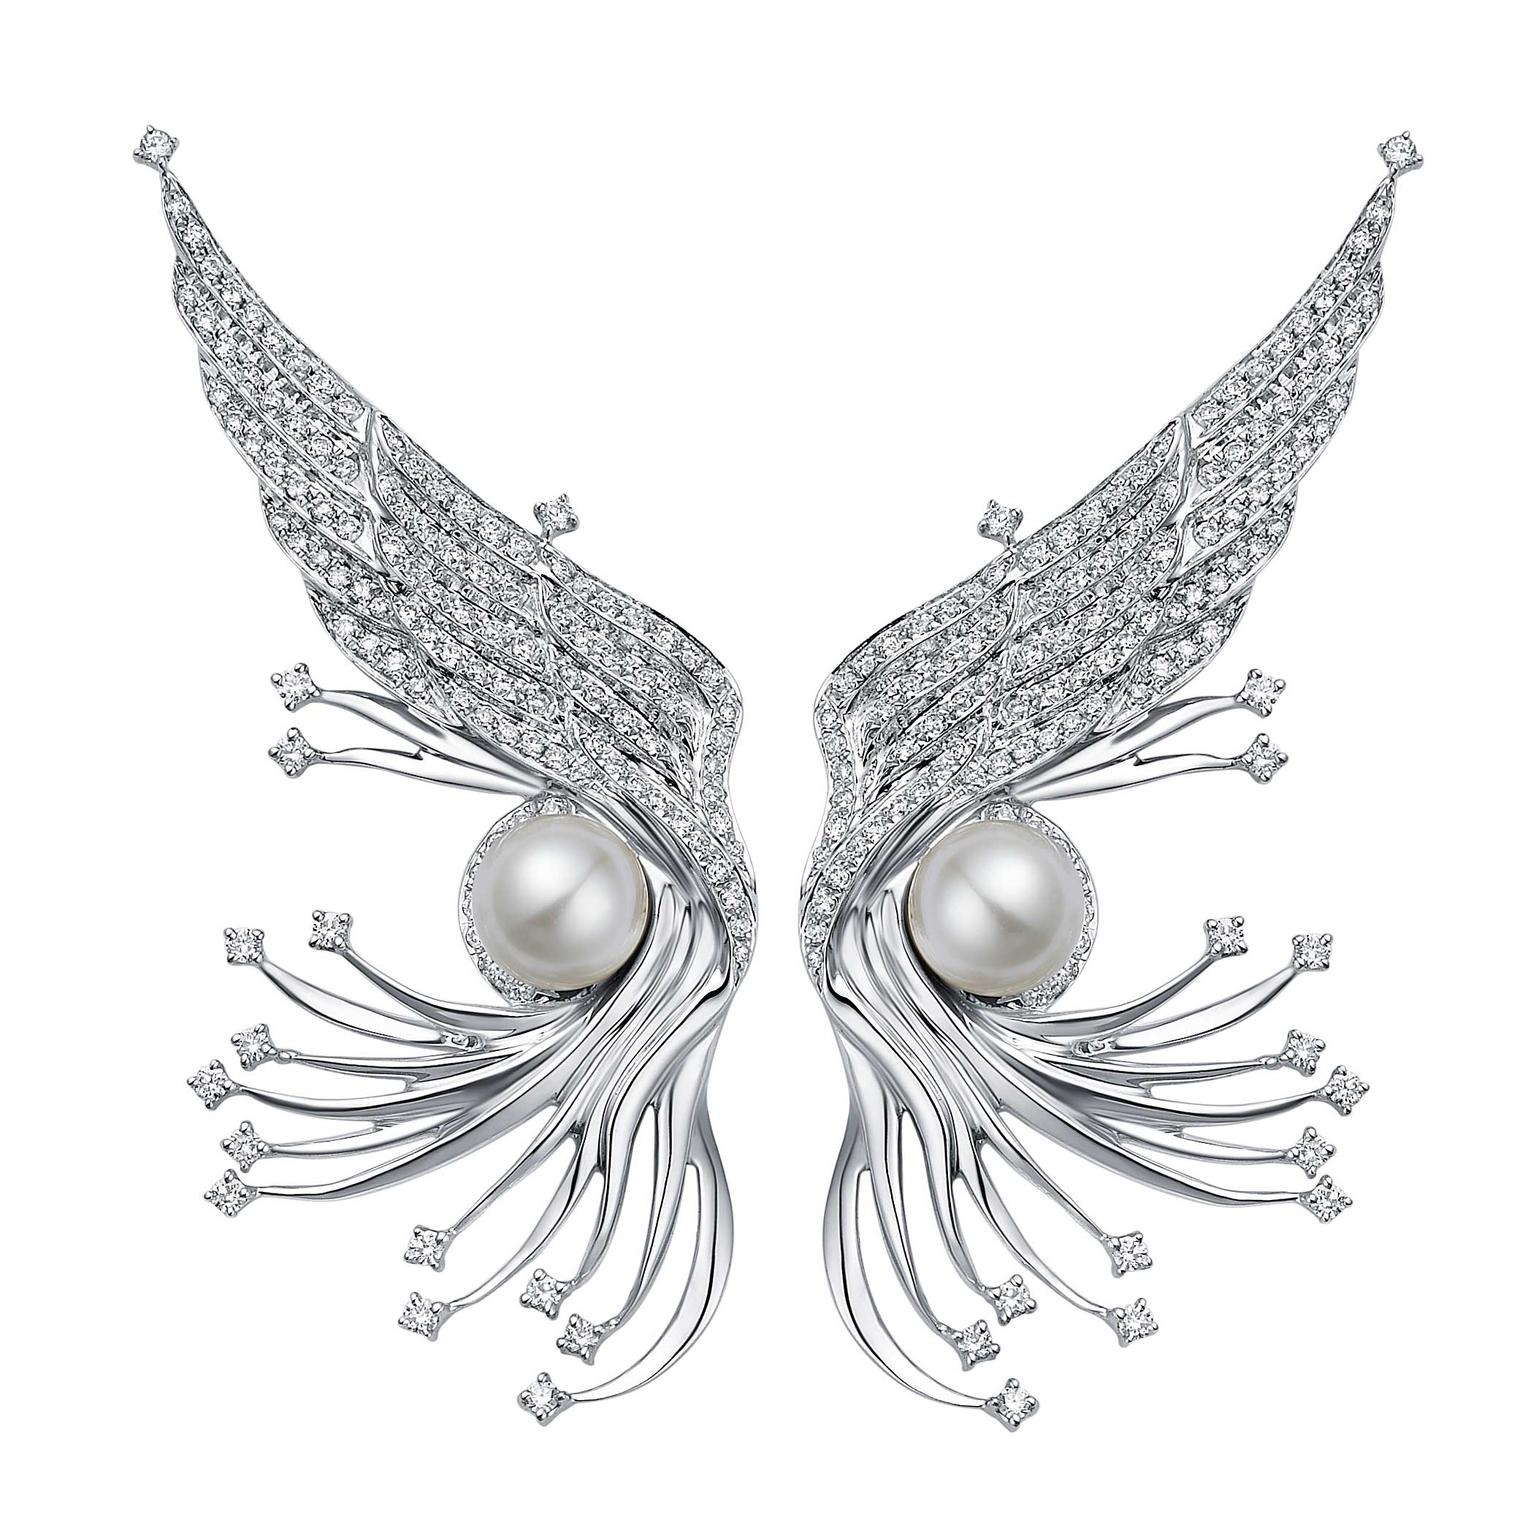 Sarah Zhuang white gold and diamond Pearl Wings earrings